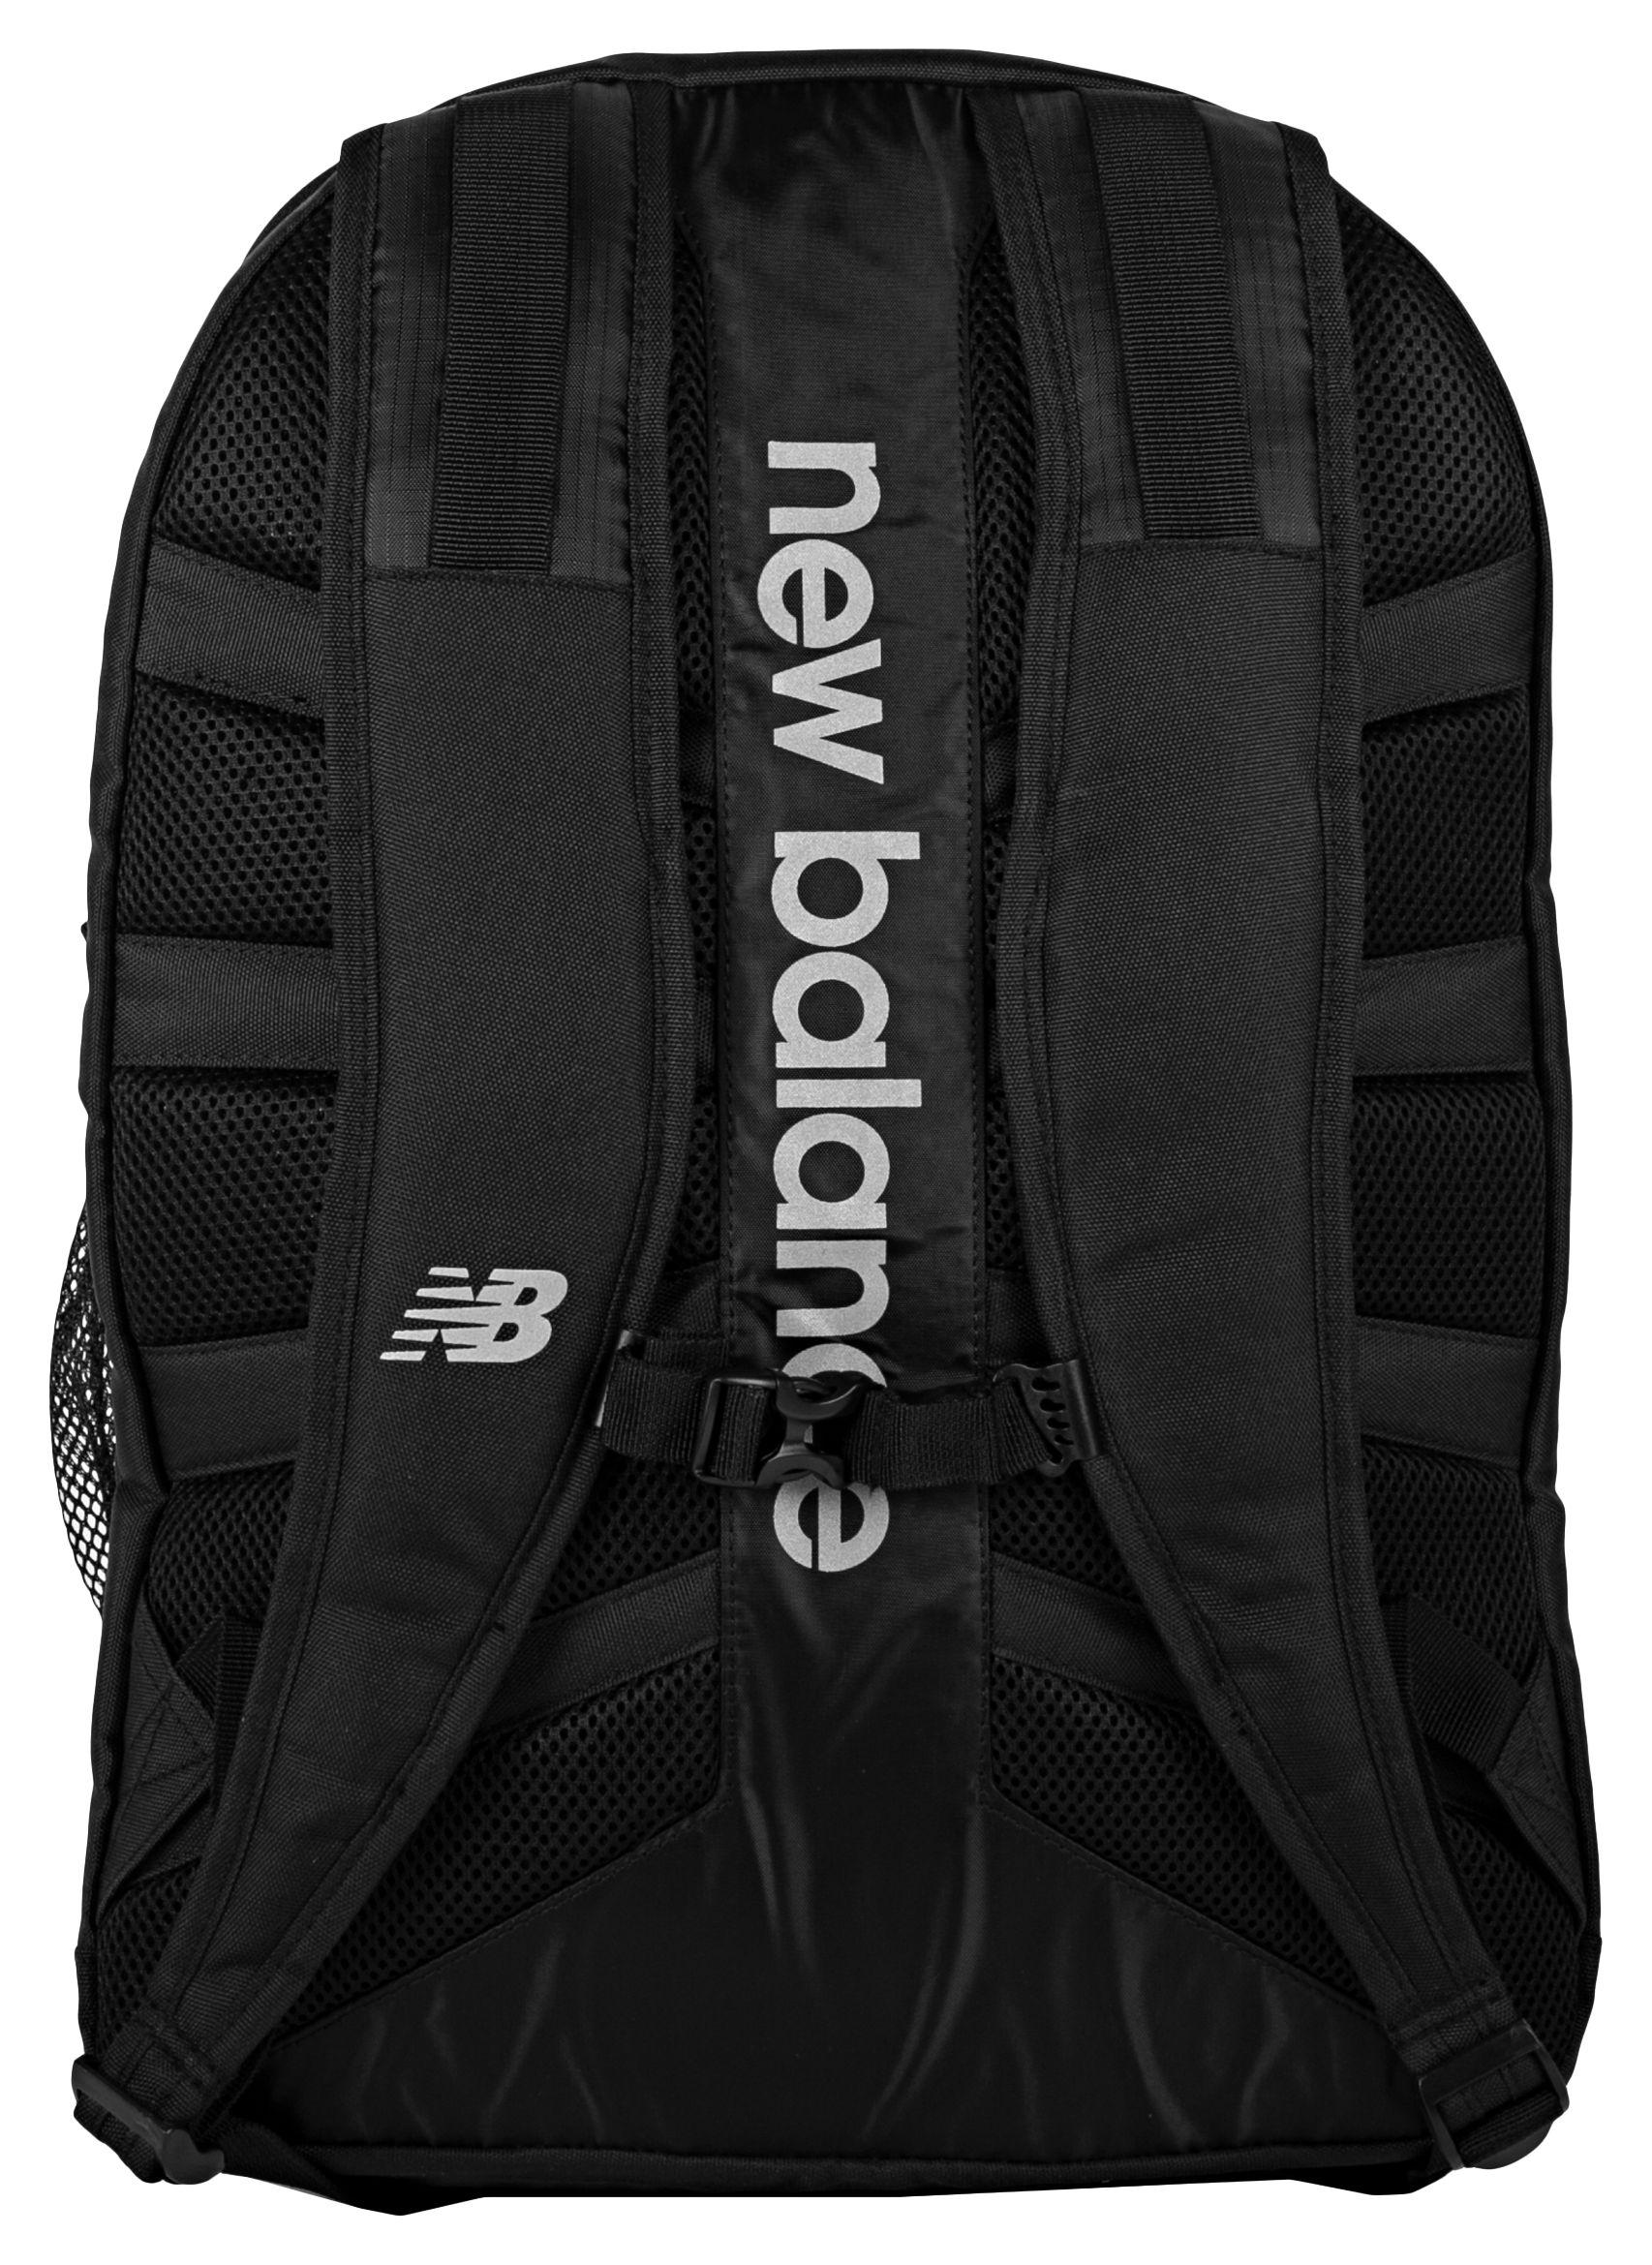 New Balance Champ Backpack in Black | Lyst